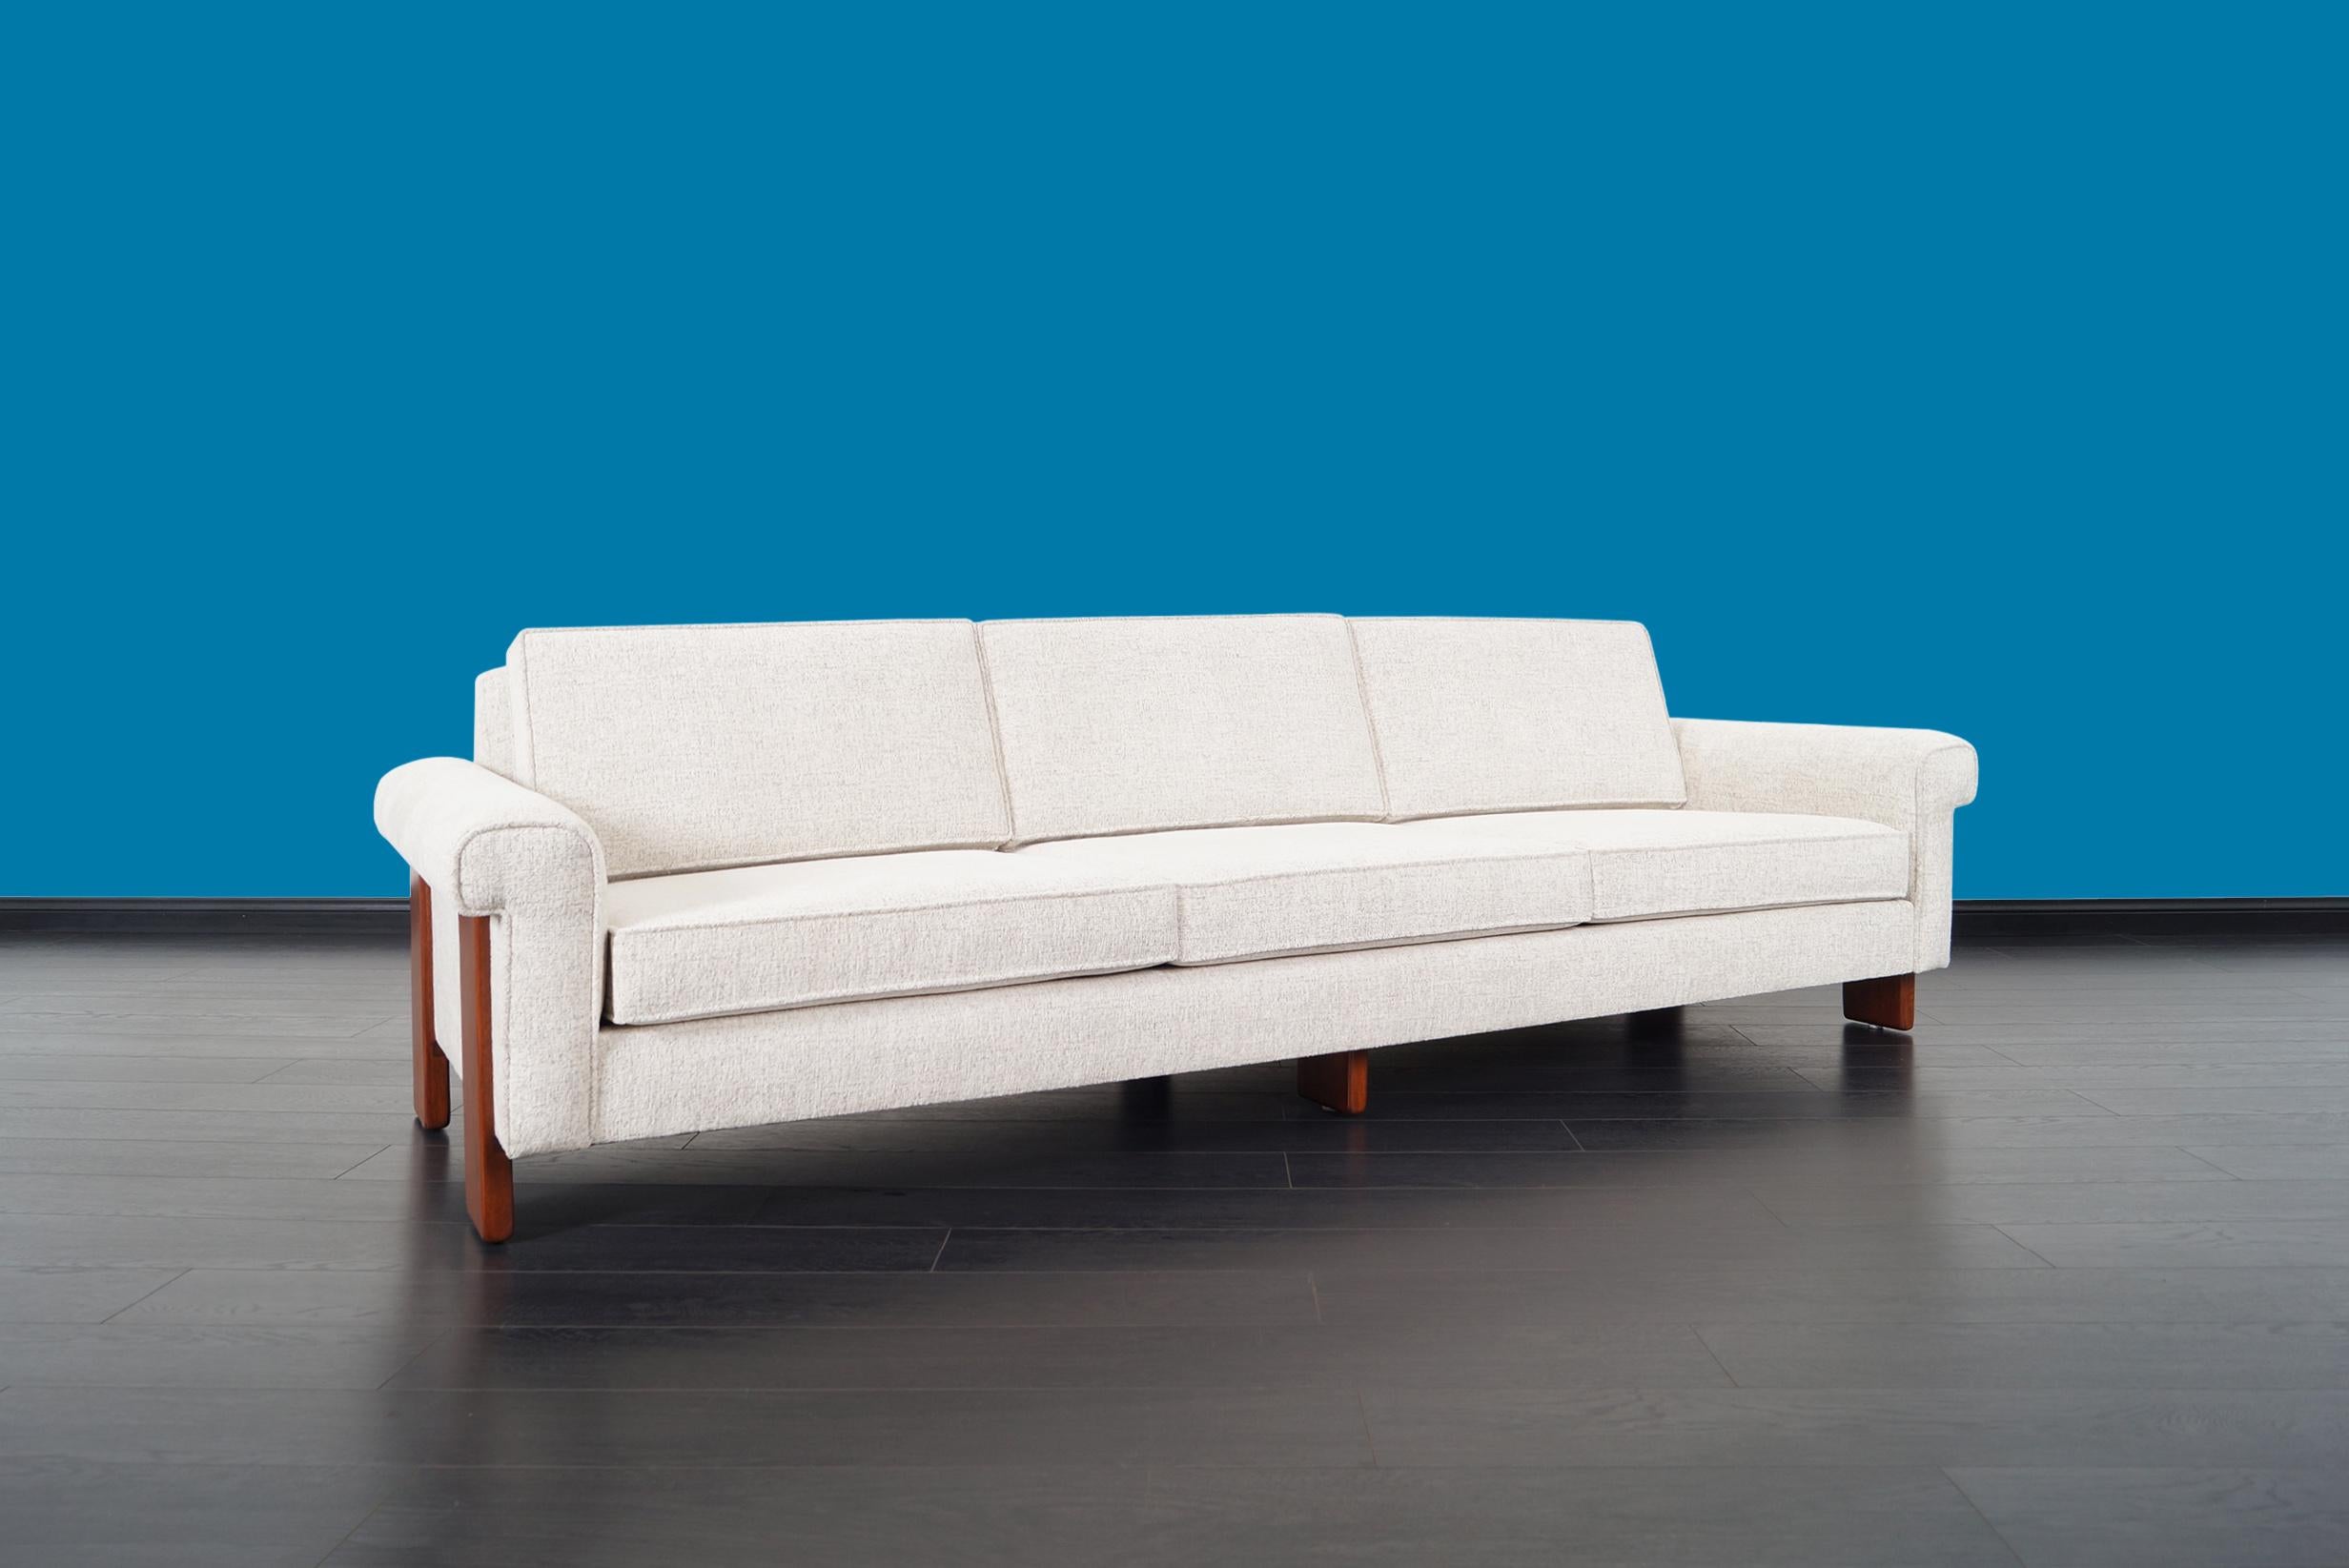 An elegant Mid-Century Modern sofa. Features solid walnut legs and newly reupholstered.